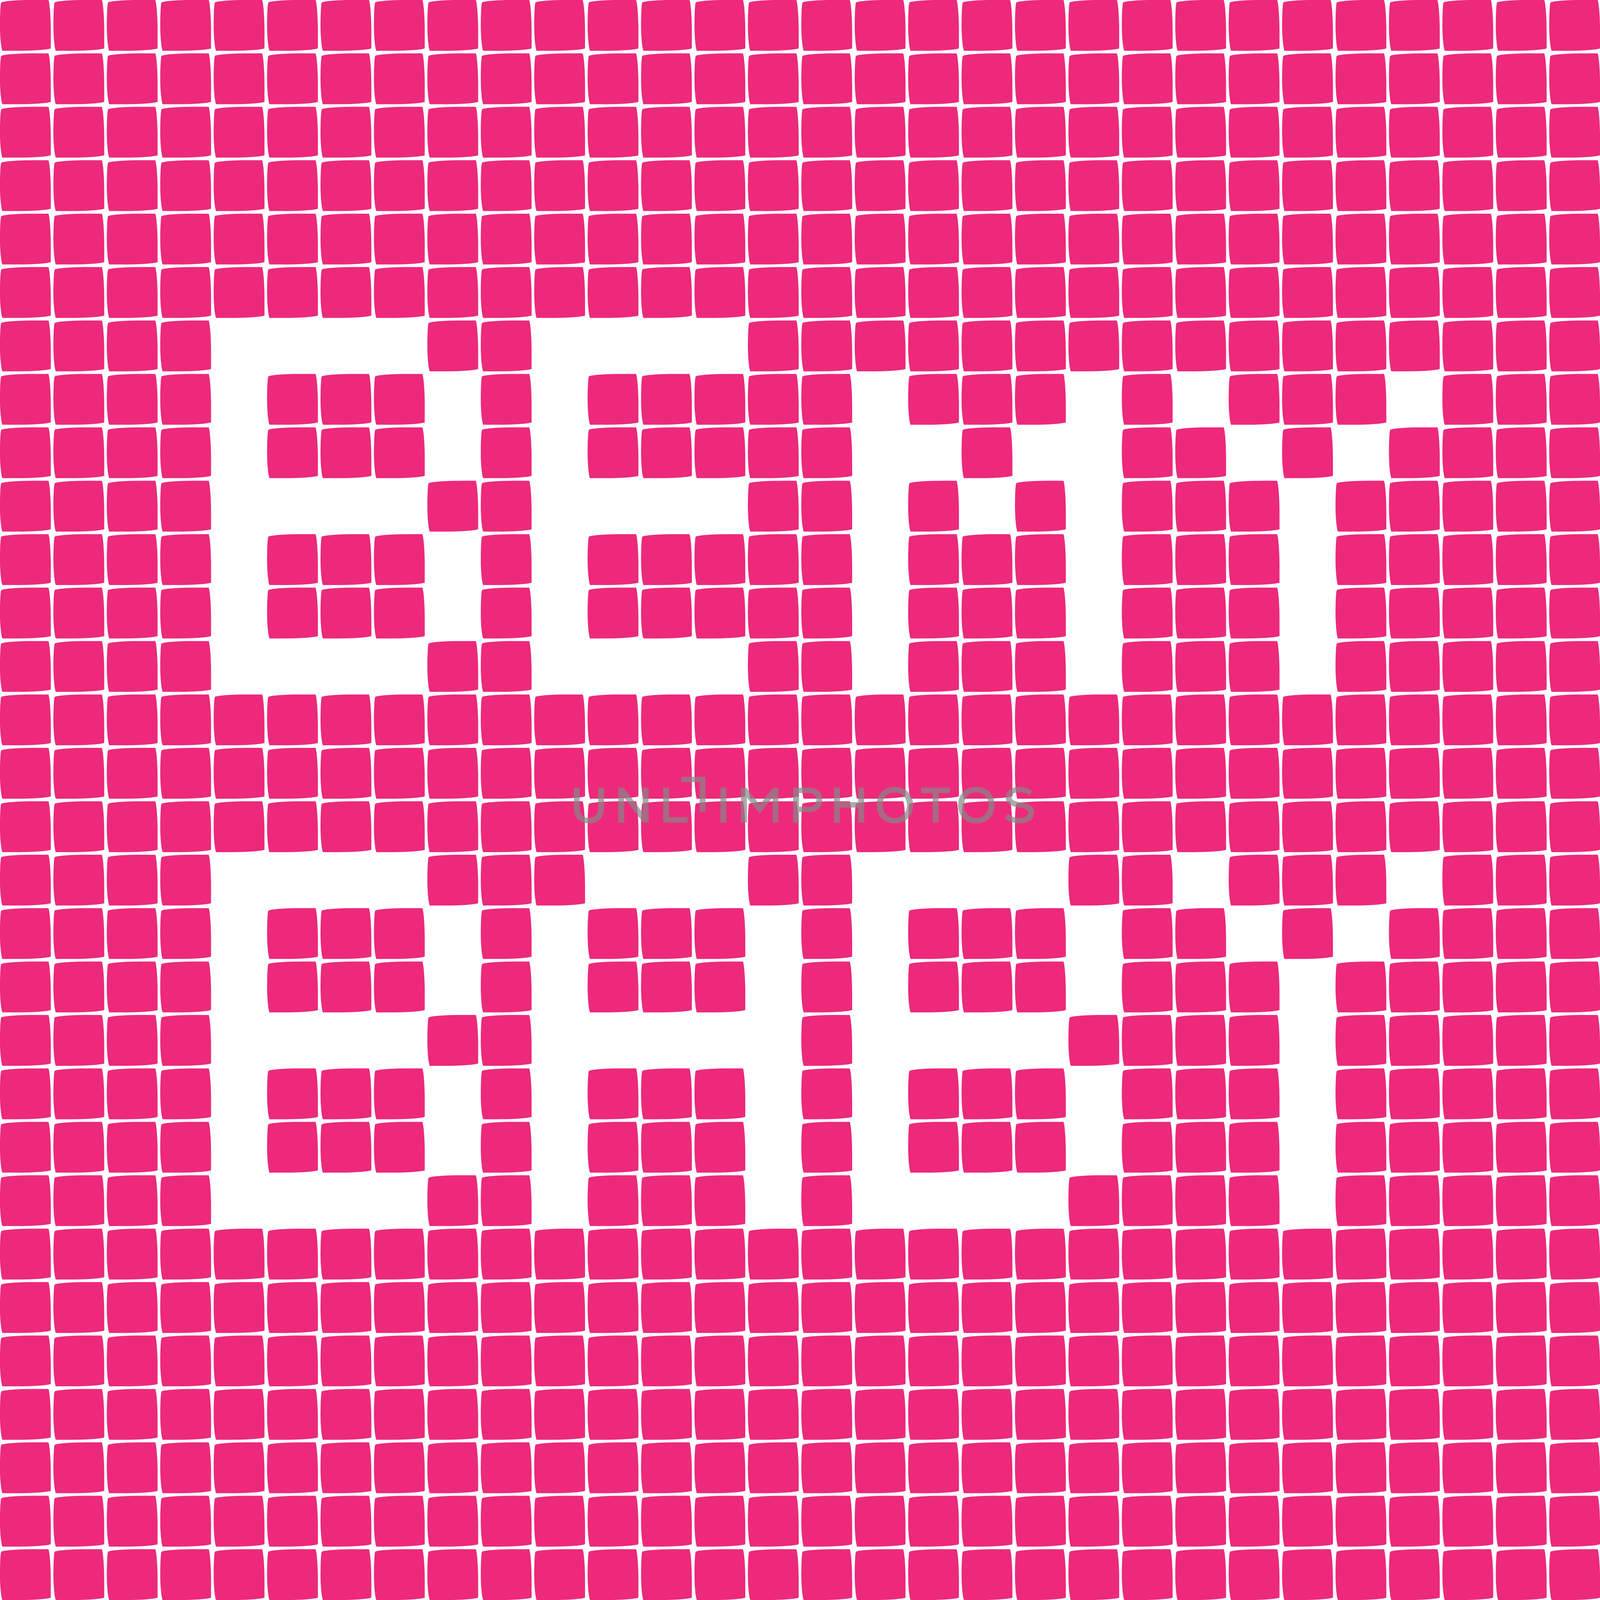 be my baby by catacos